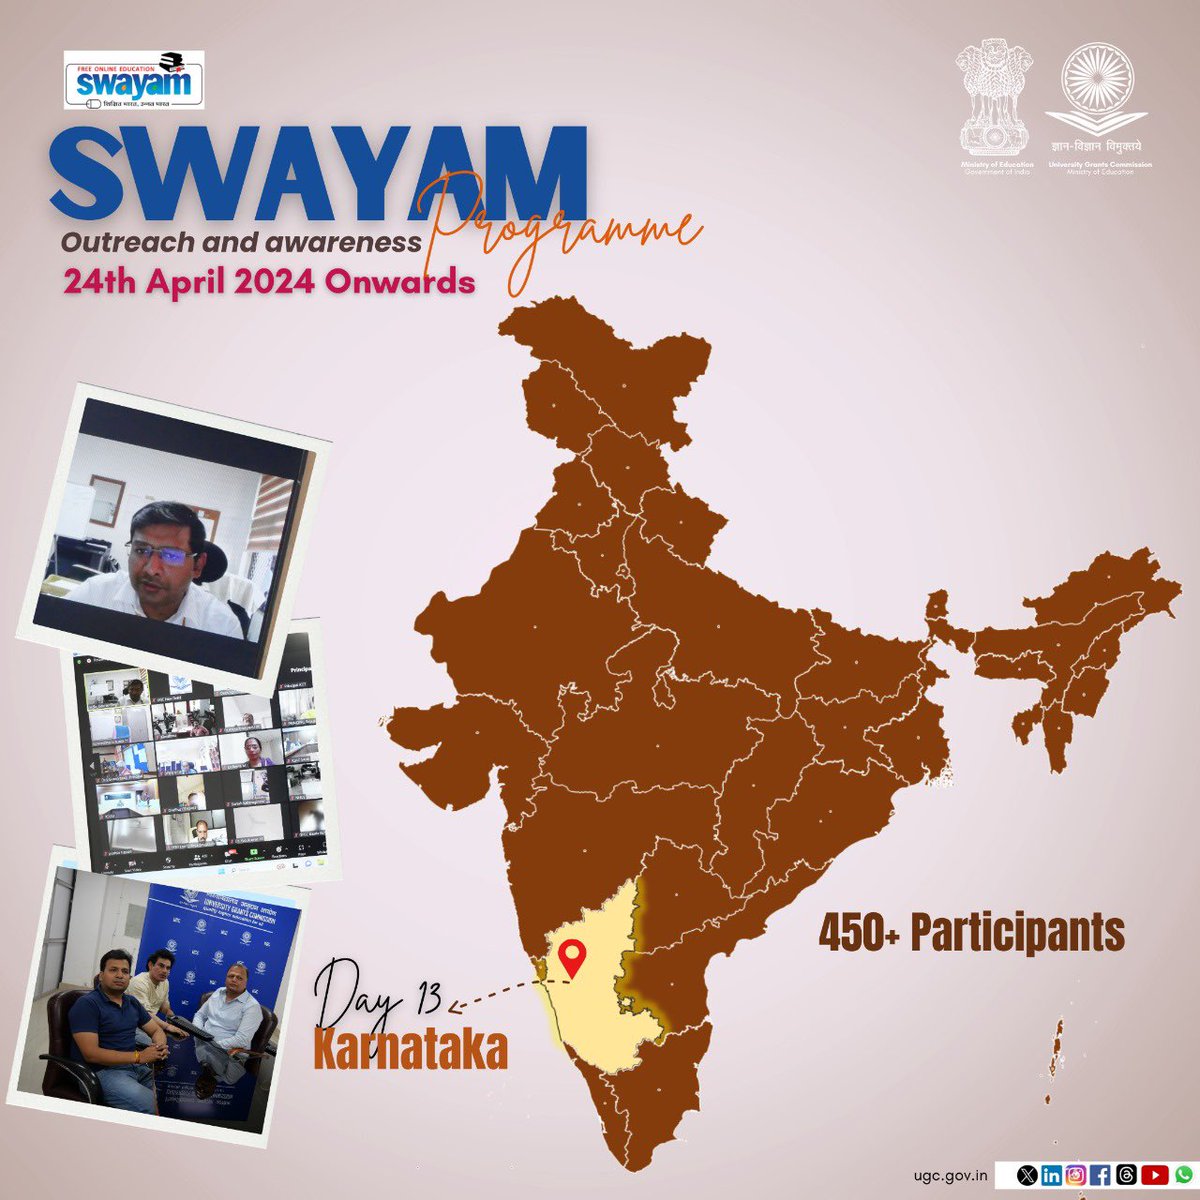 📢UGC Updates: SWAYAM Outreach & Awareness Programme, Day 13 Sh. @gaurav_gsingh, Director (TEL), Ministry of Education, along with UGC Officials, engaging with VCs, Principals, SWAYAM Local Chapters, and NEP SAARTHIs, sharing ideas, best practices, and insights on SWAYAM